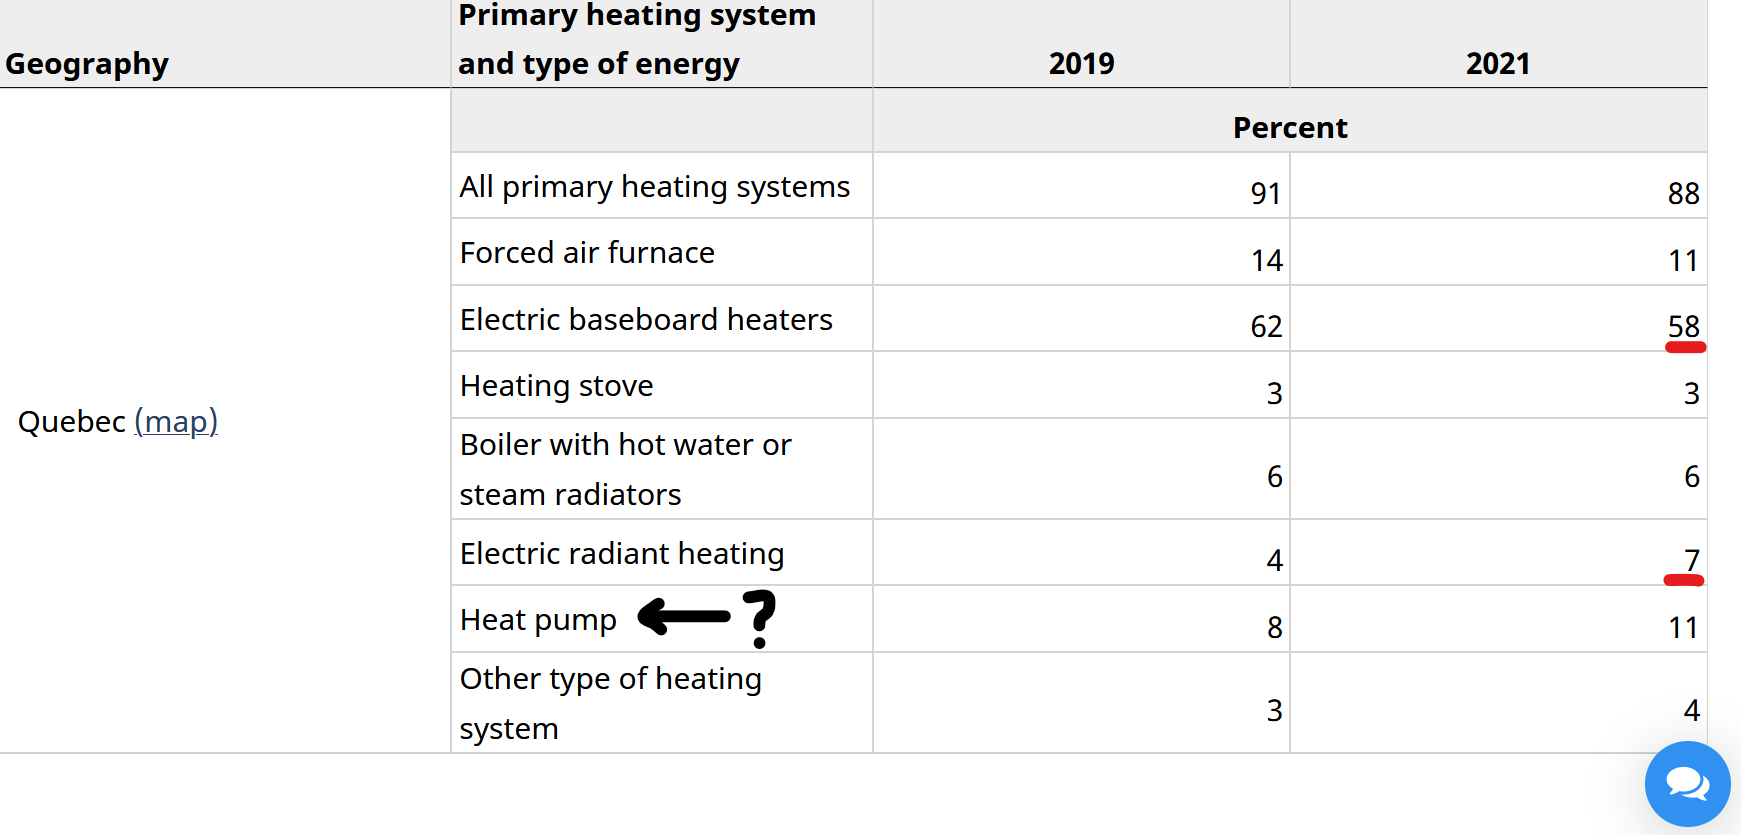 Primary heating source for Québec households.